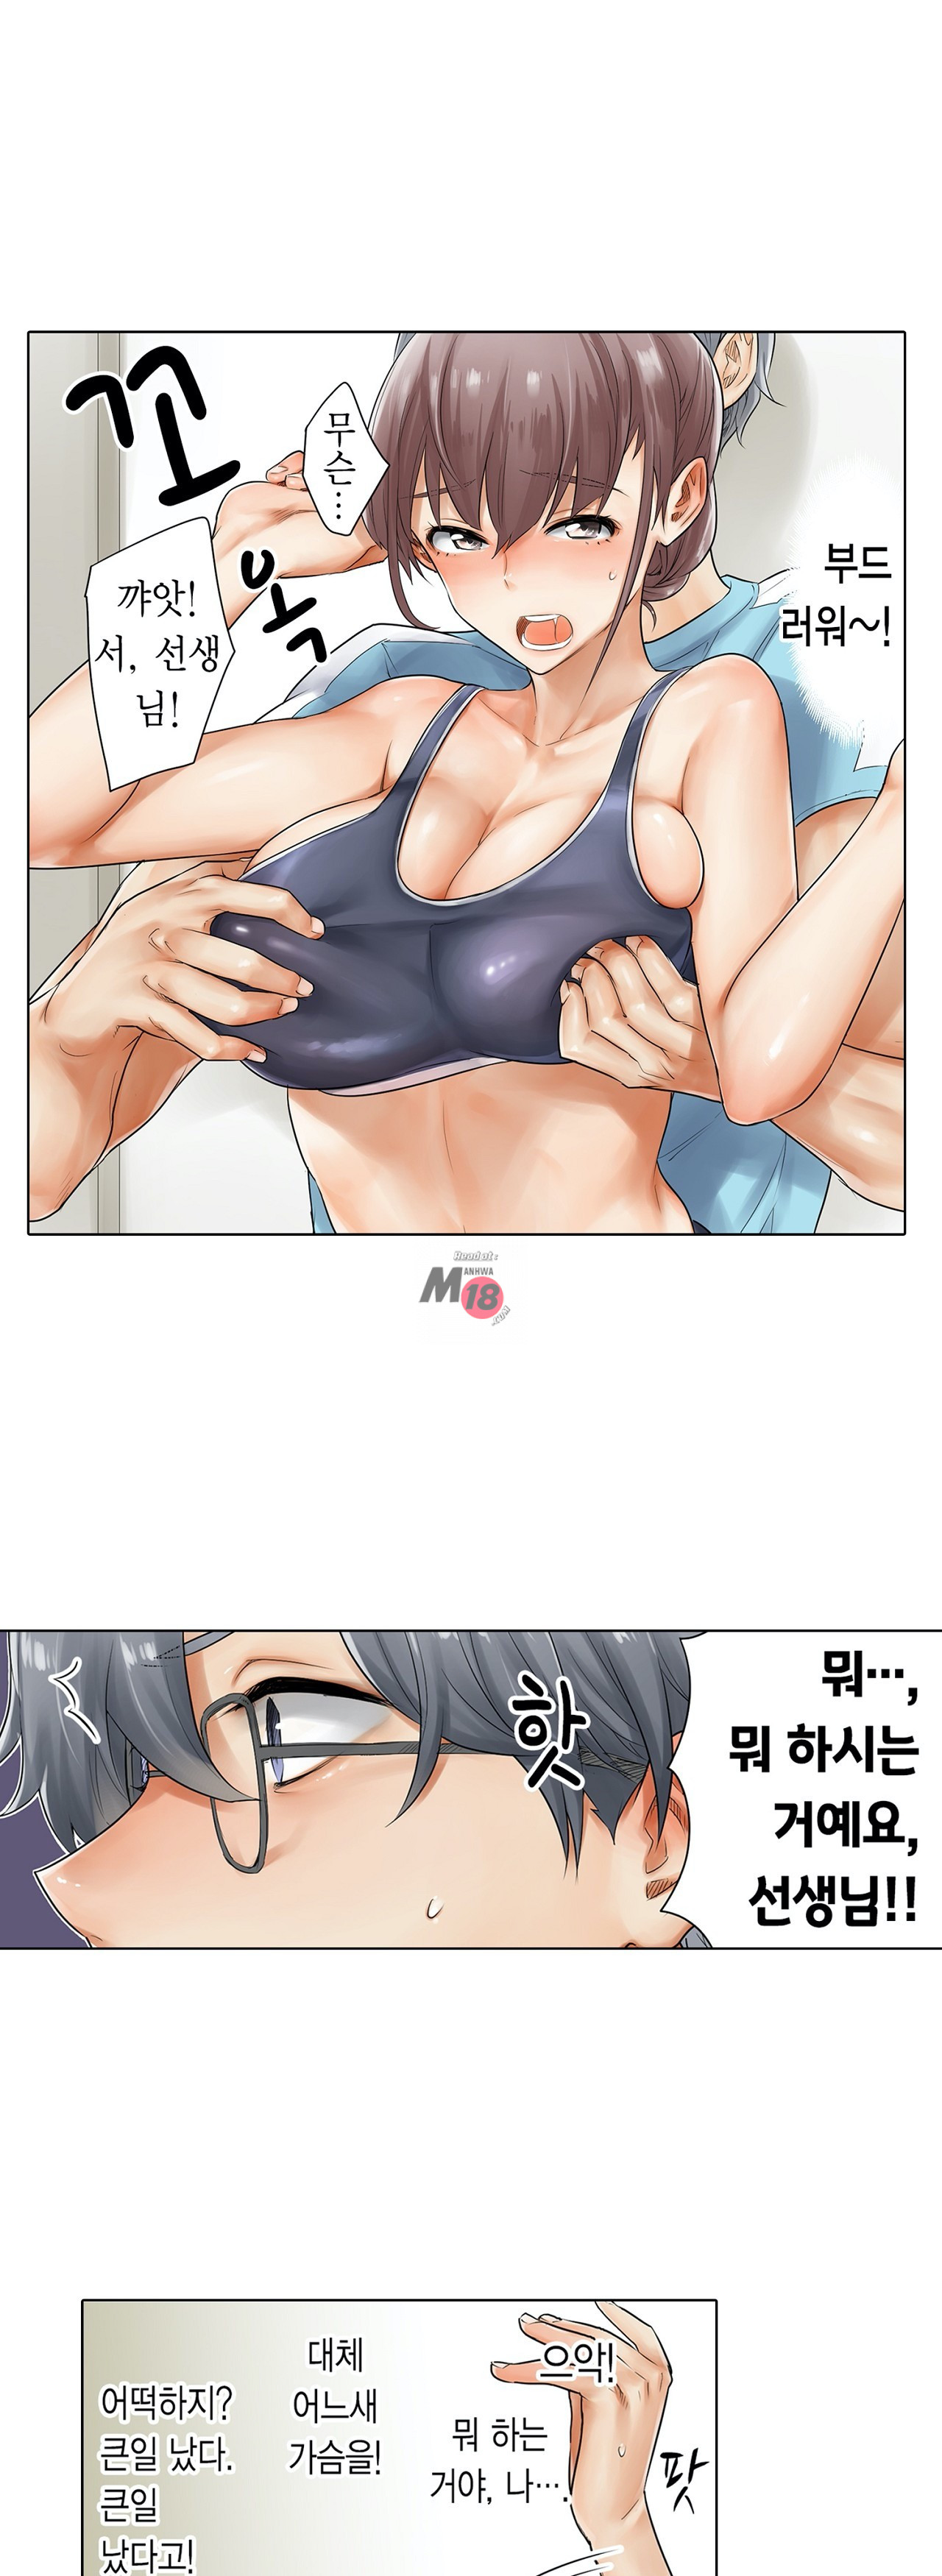 A Sweaty Sexercise Raw - Chapter 1 Page 28